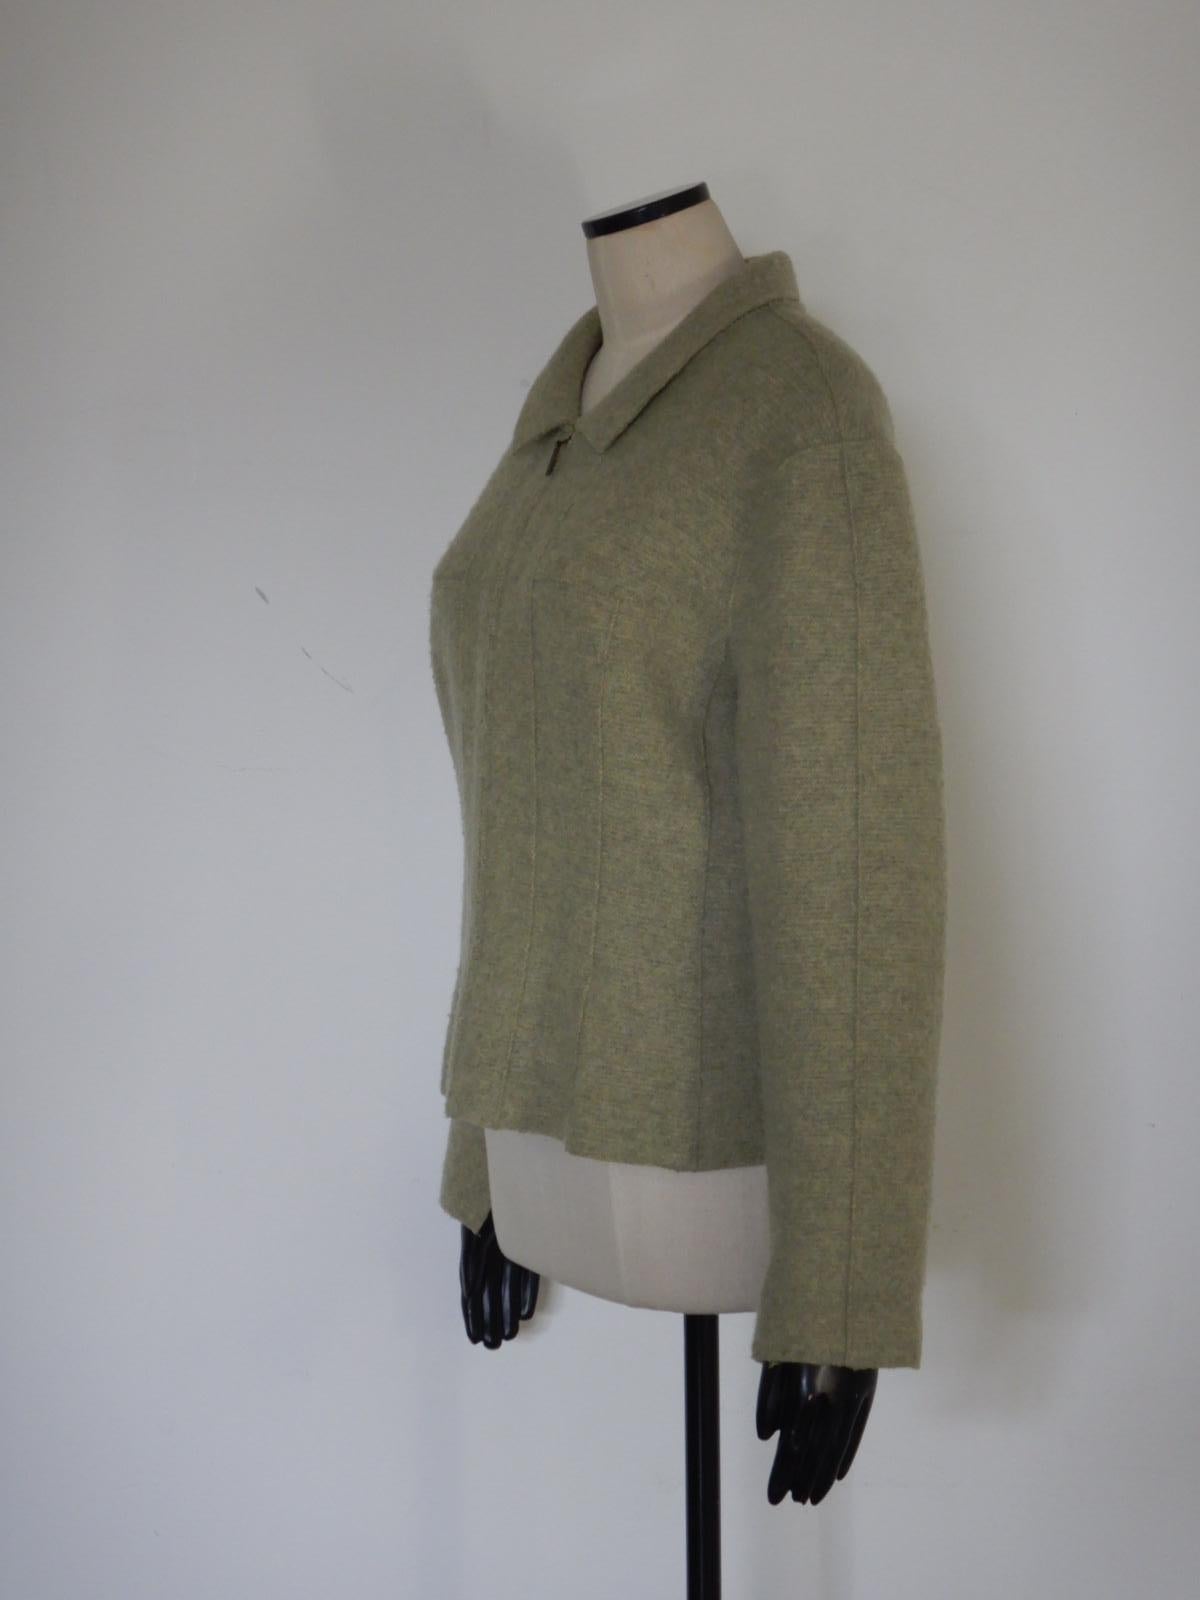 This is a zip-front Chanel wool jacket in a light green color, made for the Autumn 1999 collection. There is a v-notch on the inner side of the sleeve cuffs.

The jacket is tagged size 44.

This item is in good pre-owned condition. The jacket is